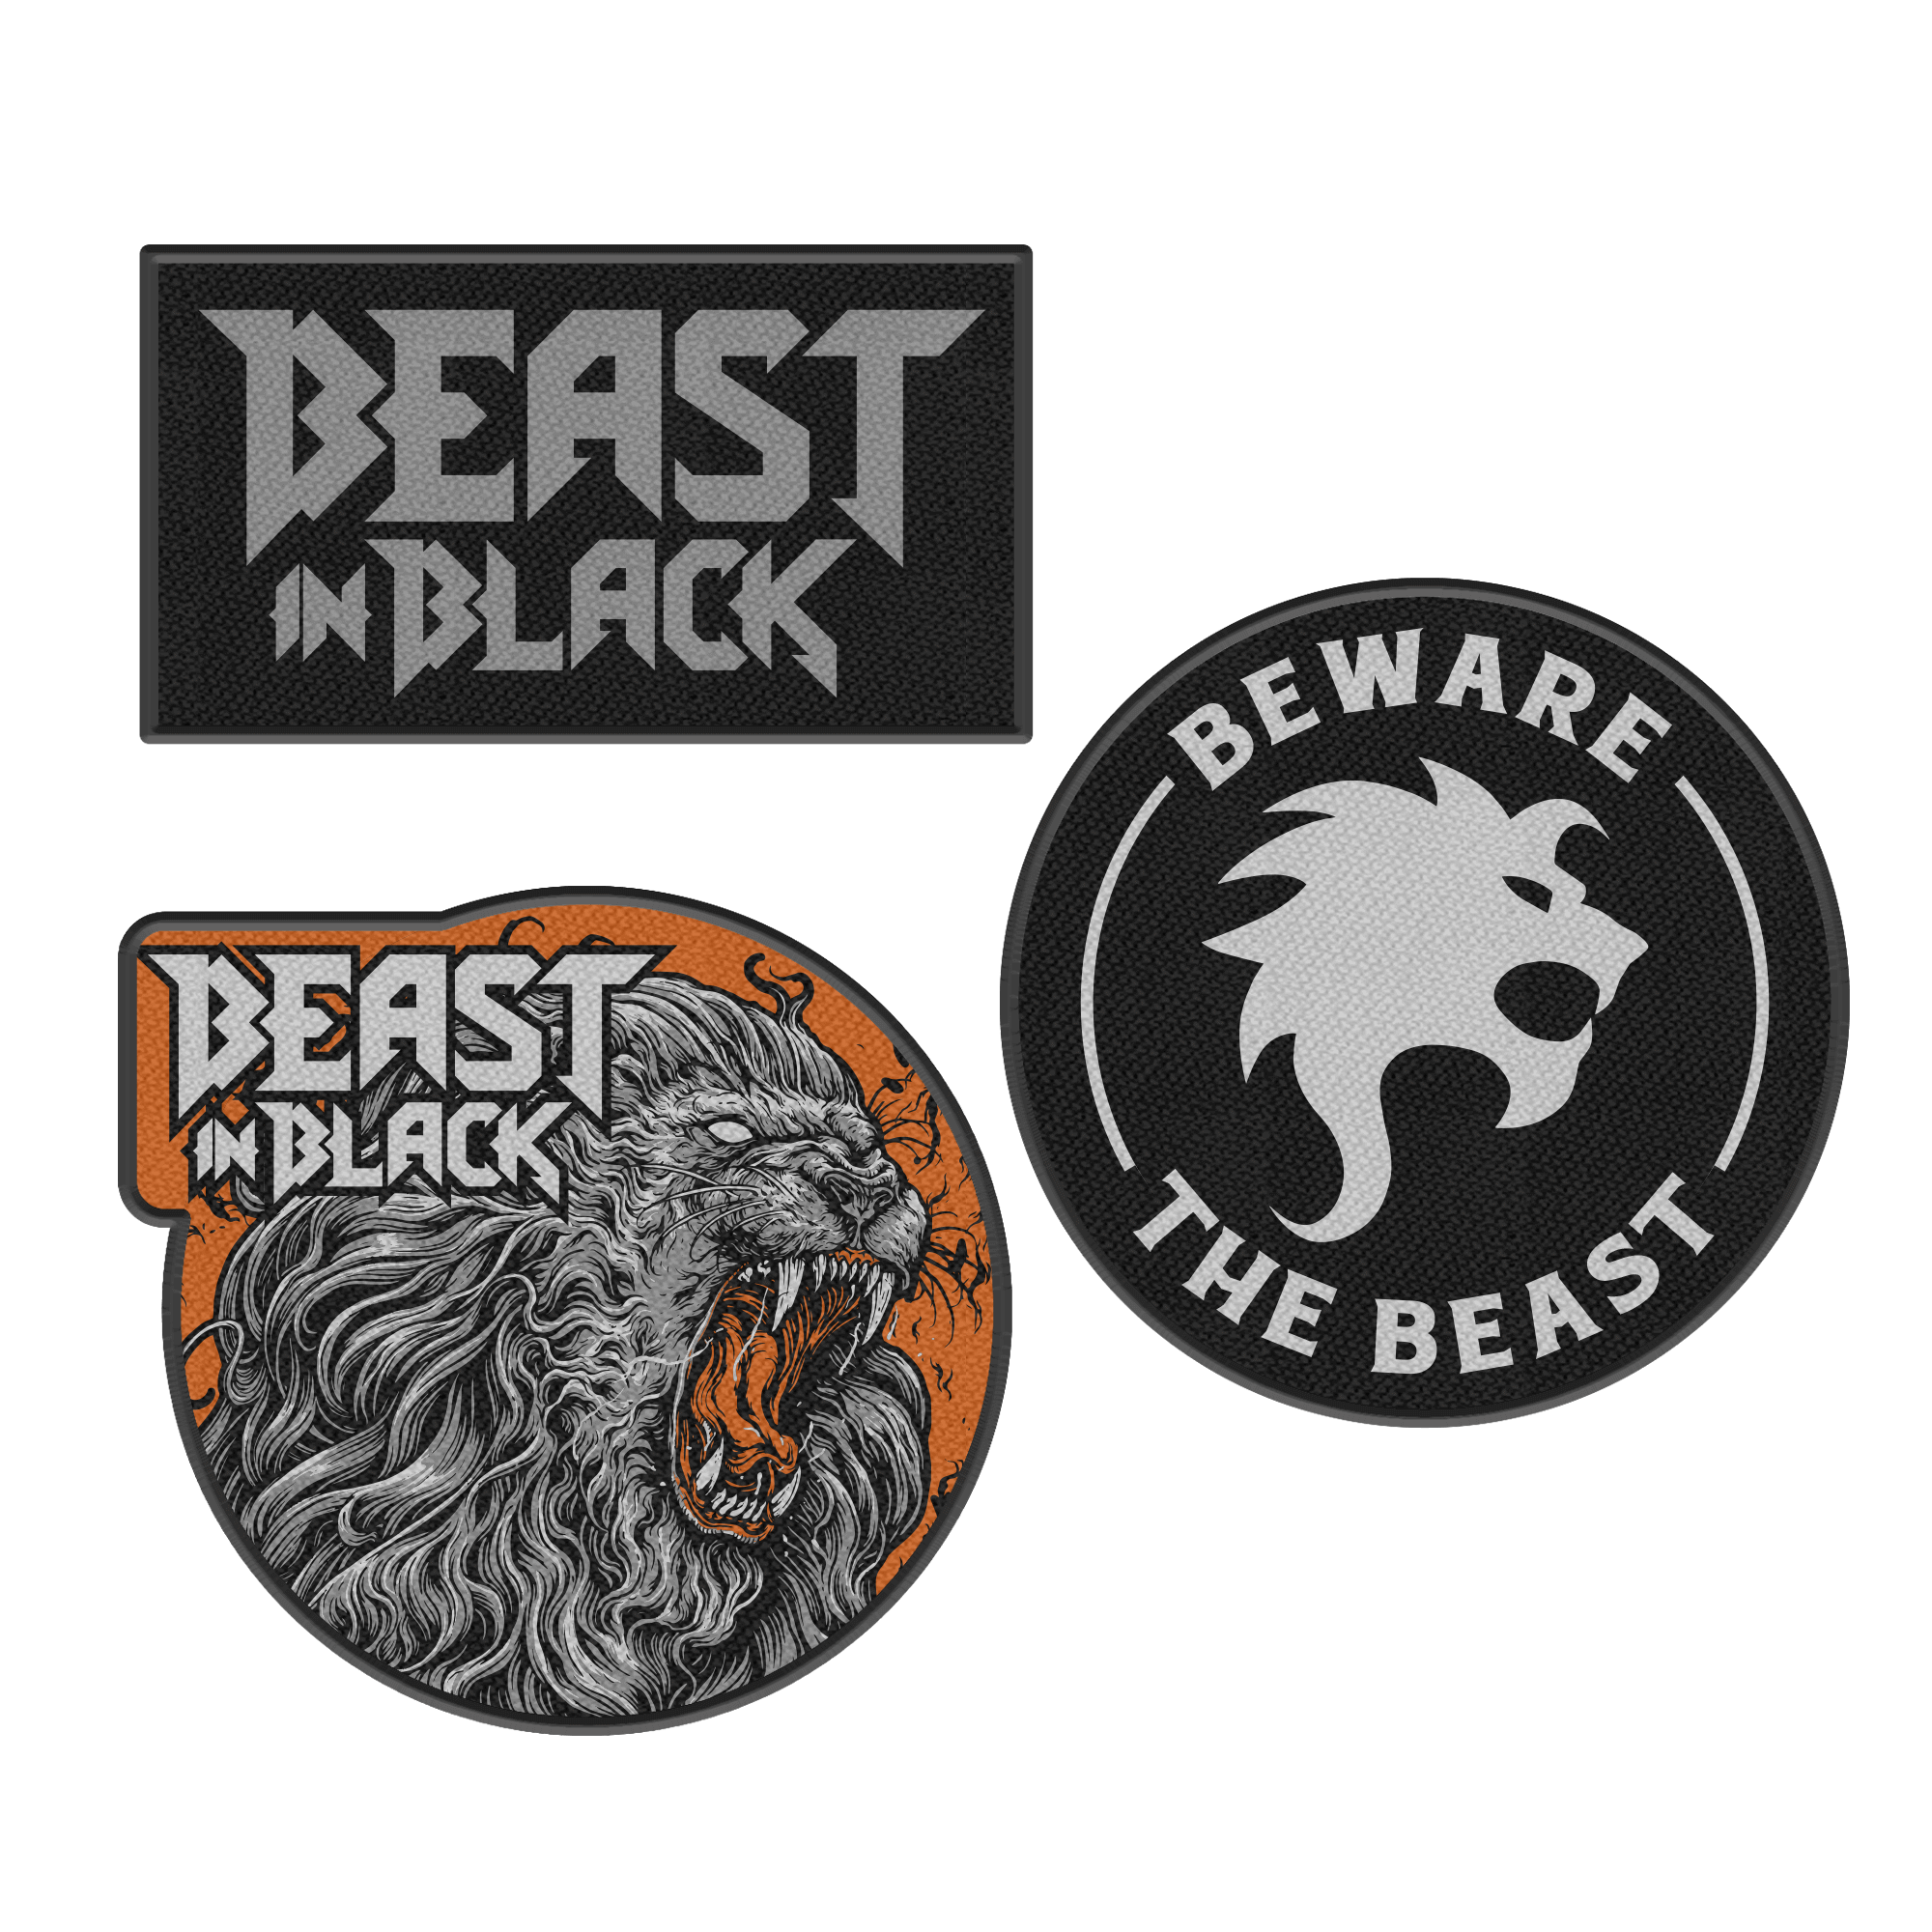 https://images.bravado.de/prod/product-assets/product-asset-data/beast-in-black/beast-in-black/products/505995/web/417870/image-thumb__417870__3000x3000_original/Beast-In-Black-Beast-Within-Patch-mehrfarbig-505995-417870.634b2cd6.png